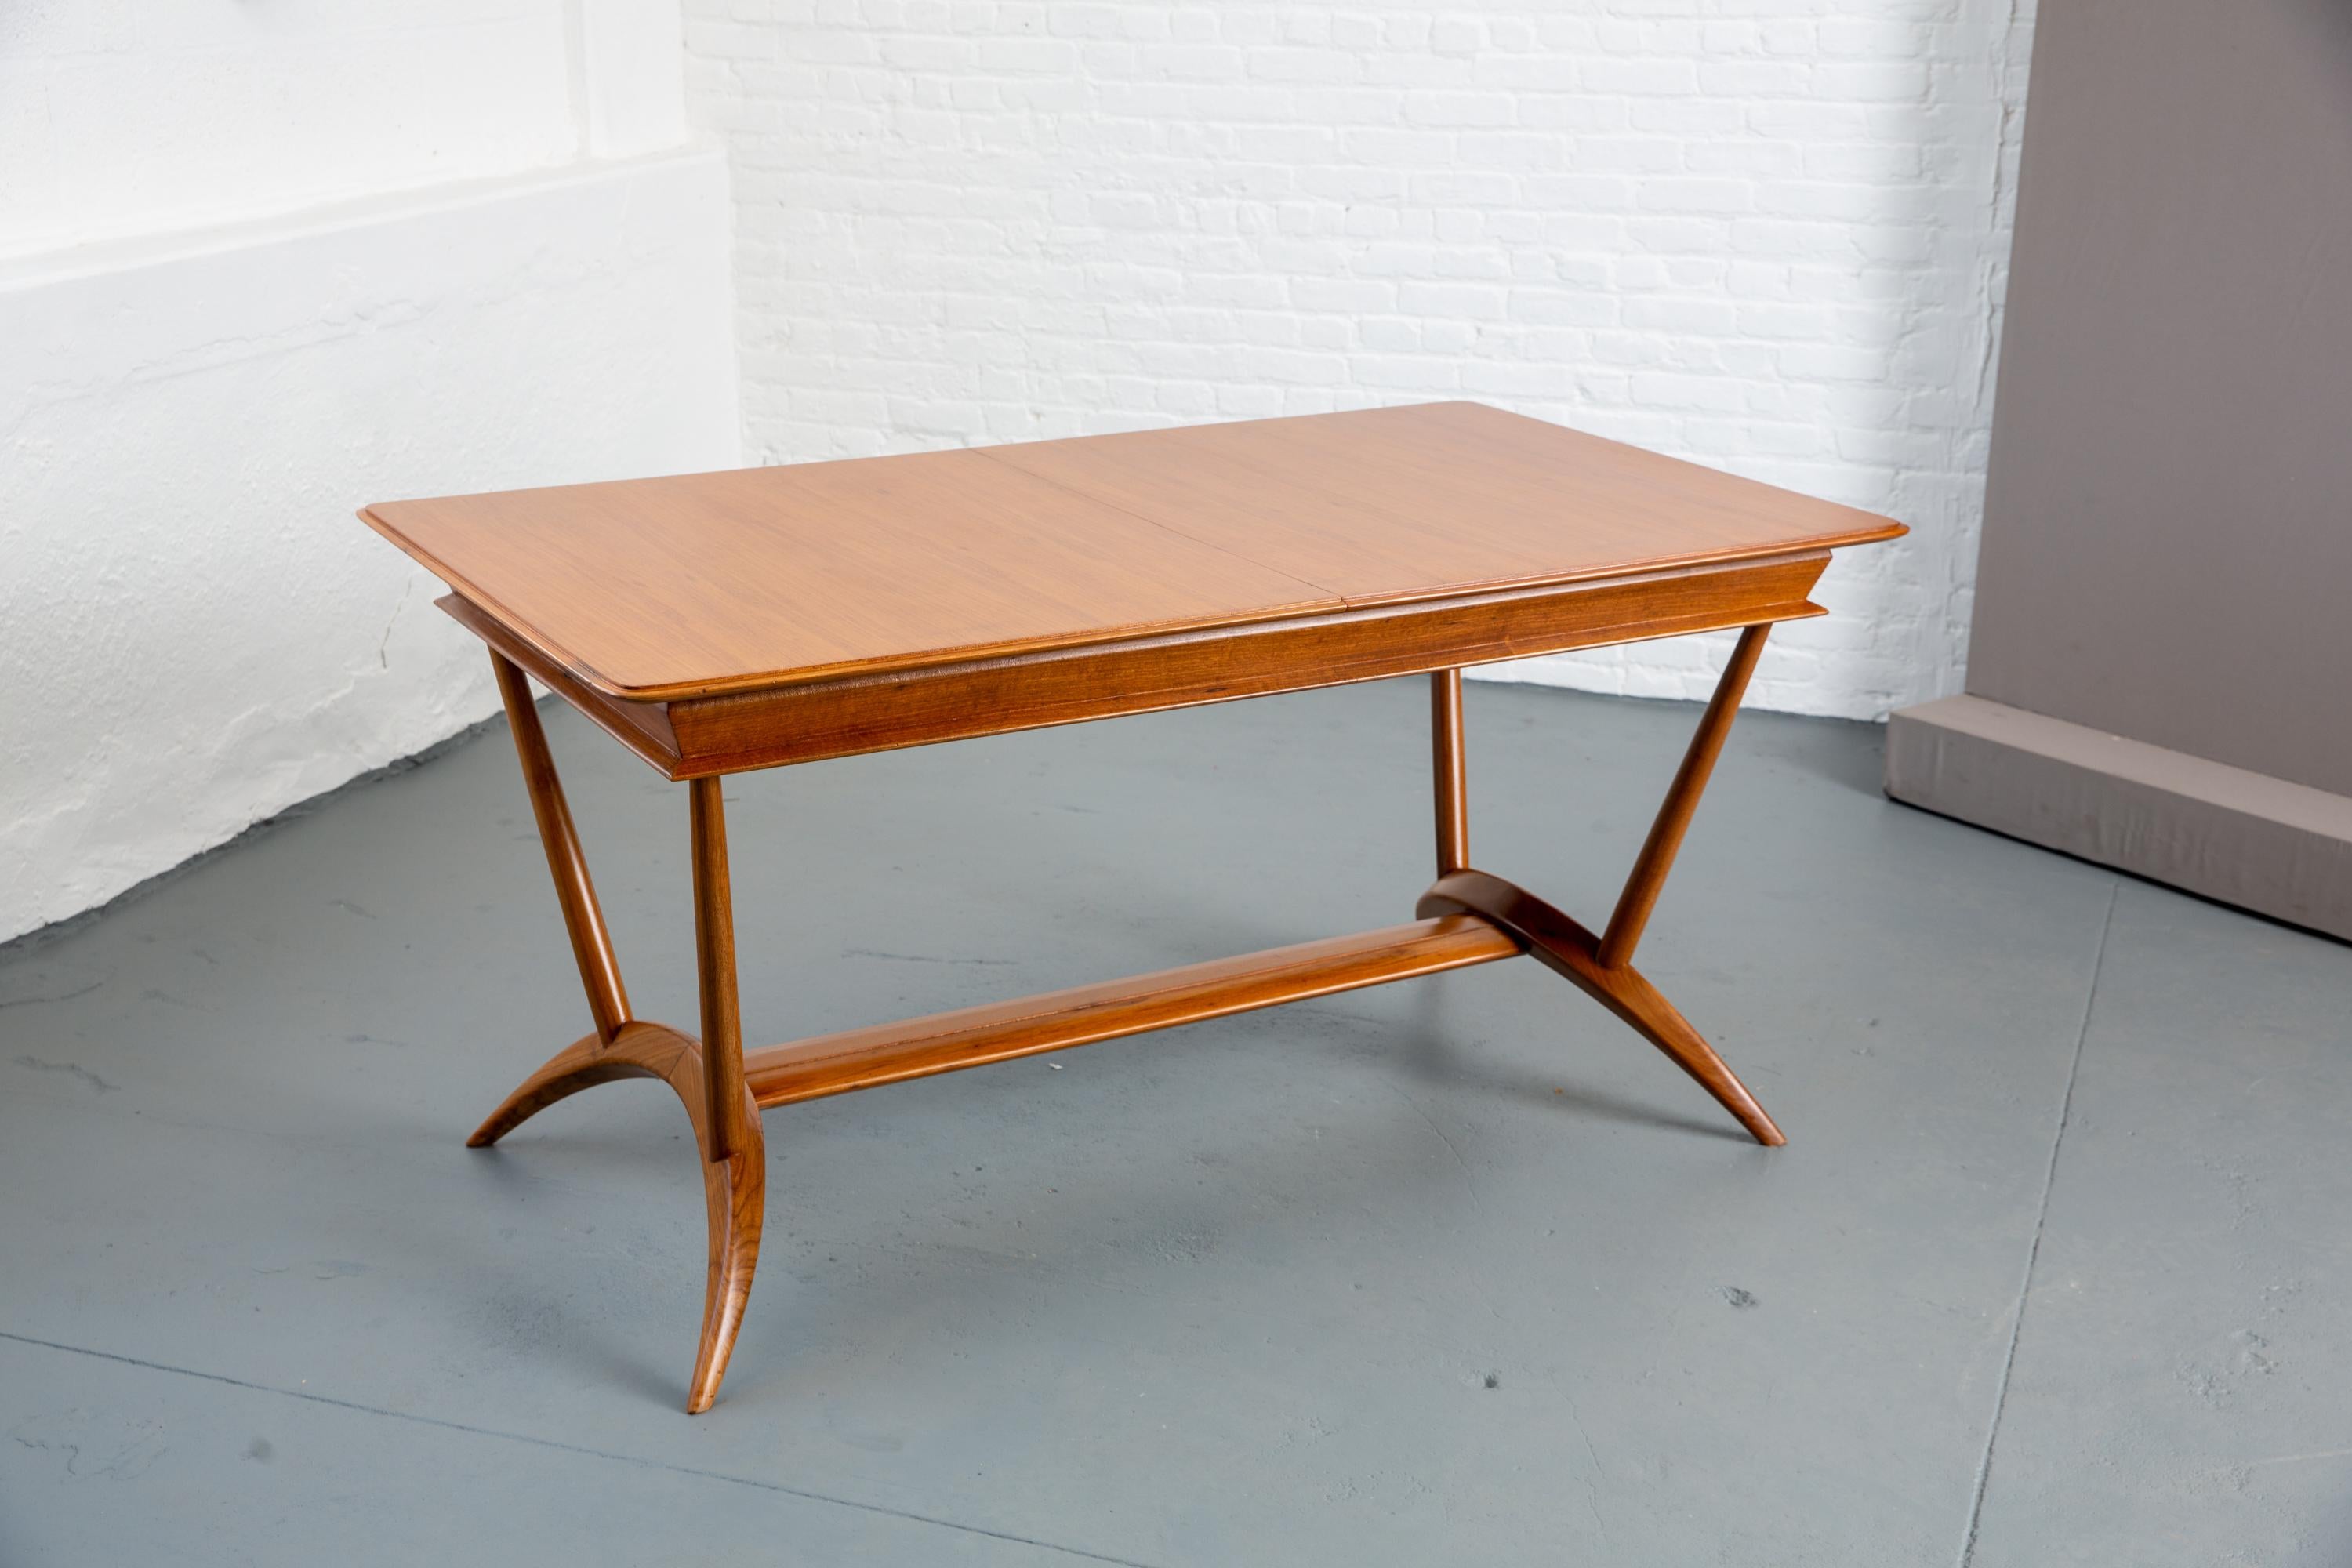 Beautiful 1940s MidCcentury French dining table with 1 leaf. Splayed leg base. Marked 